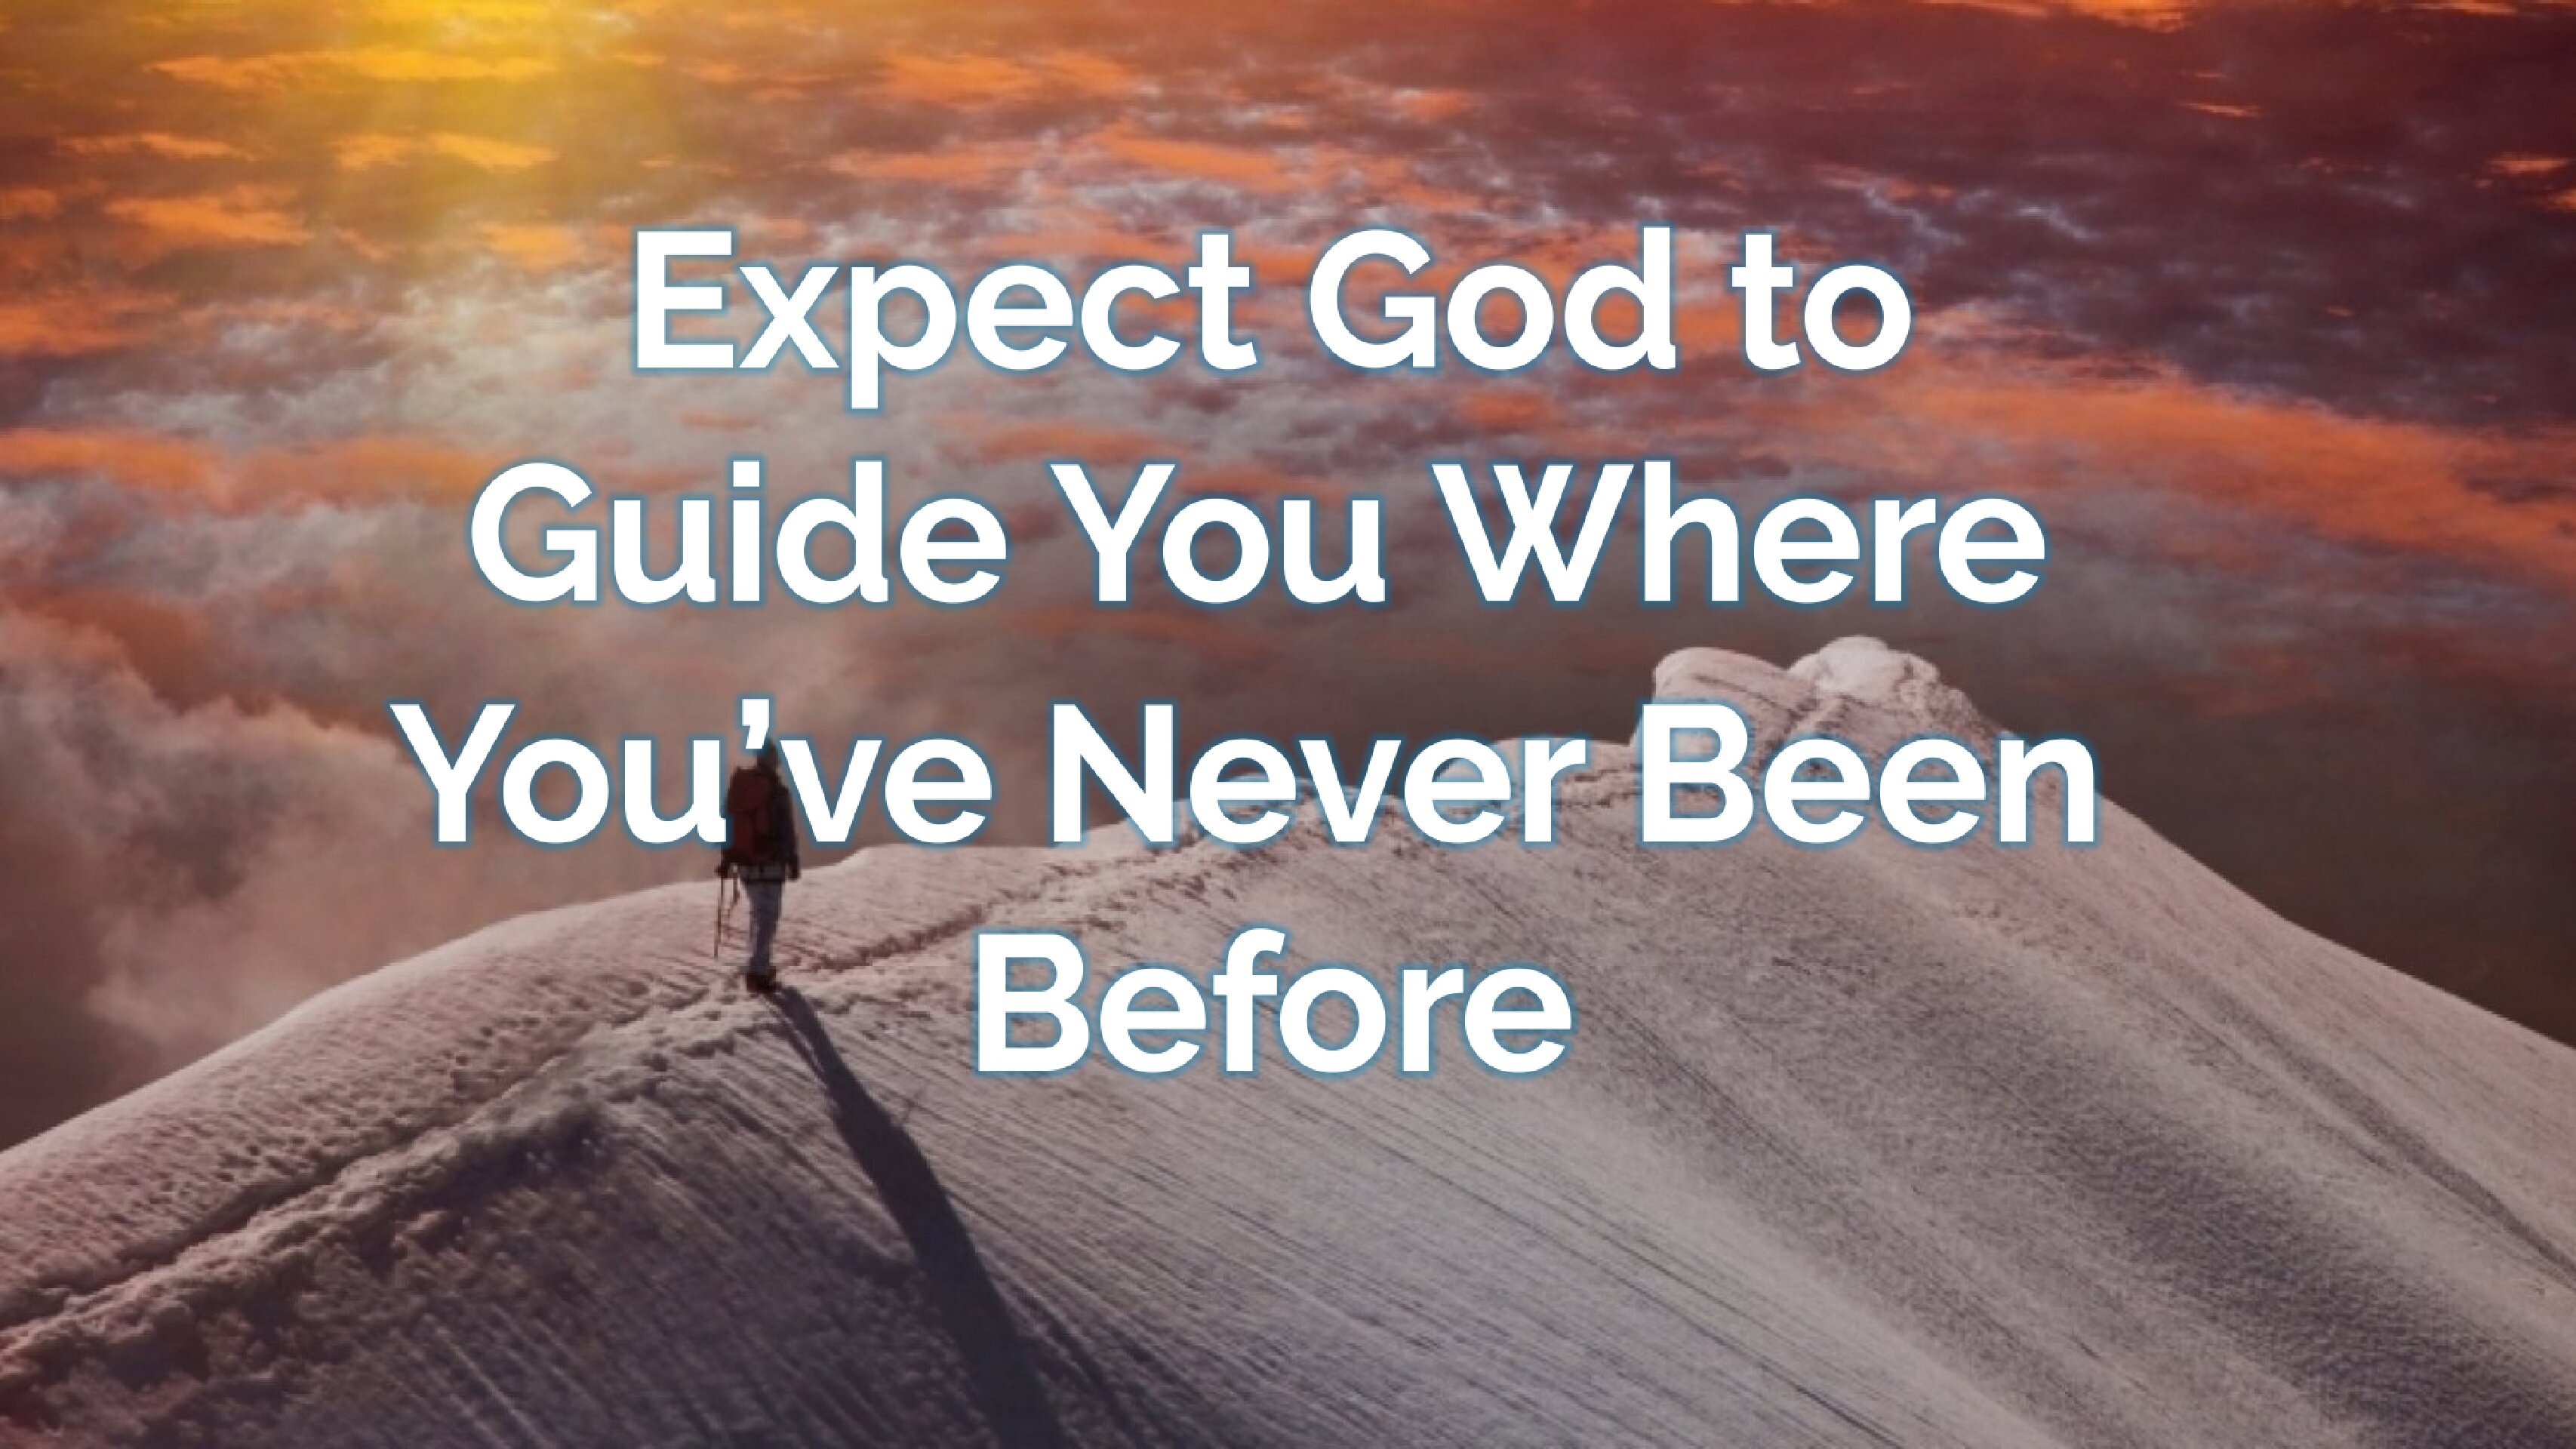 Expect God to Guide You Where You’ve Never Been Before